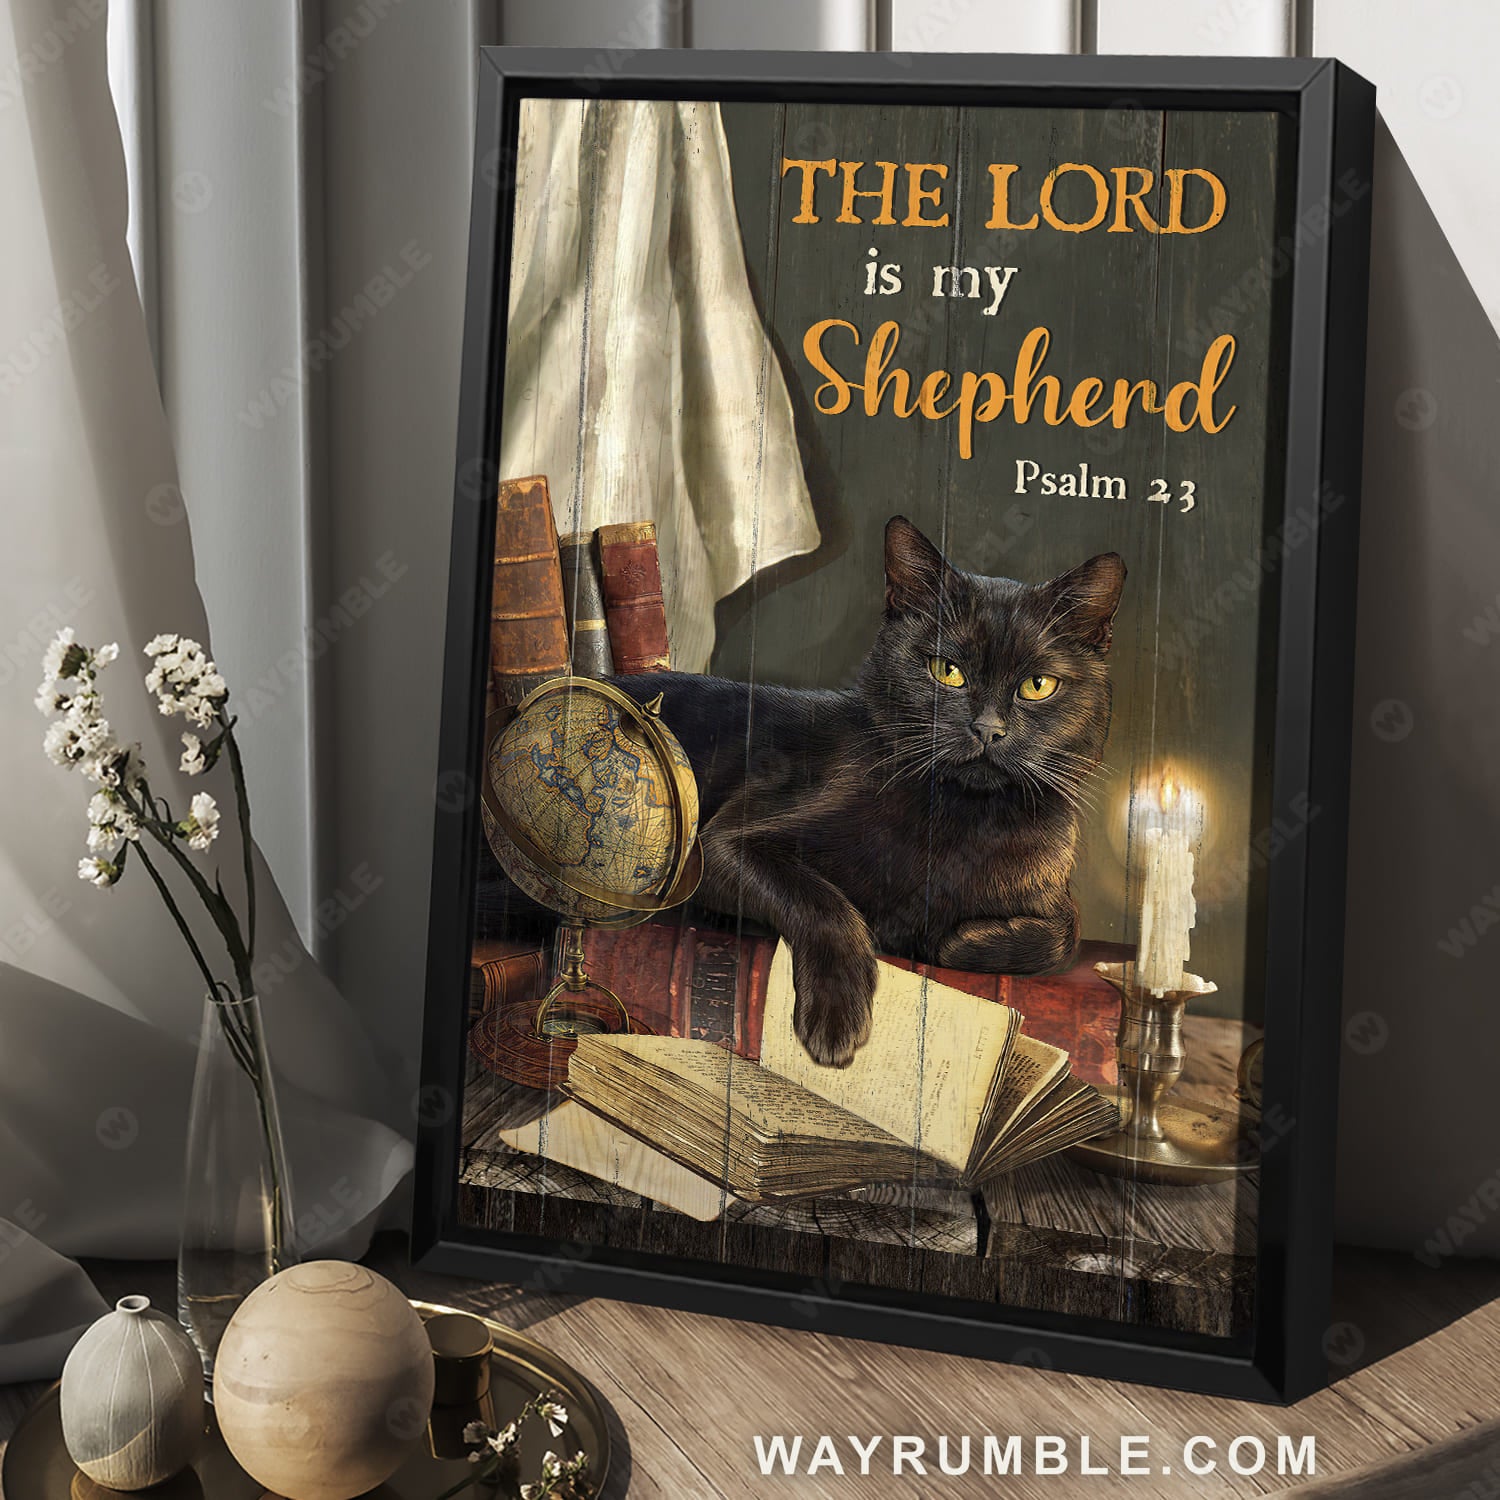 Black cat drawing, Antique book, Gold globe, Candle, The Lord is my shepherd - Jesus Portrait Canvas Prints, Christian Wall Art